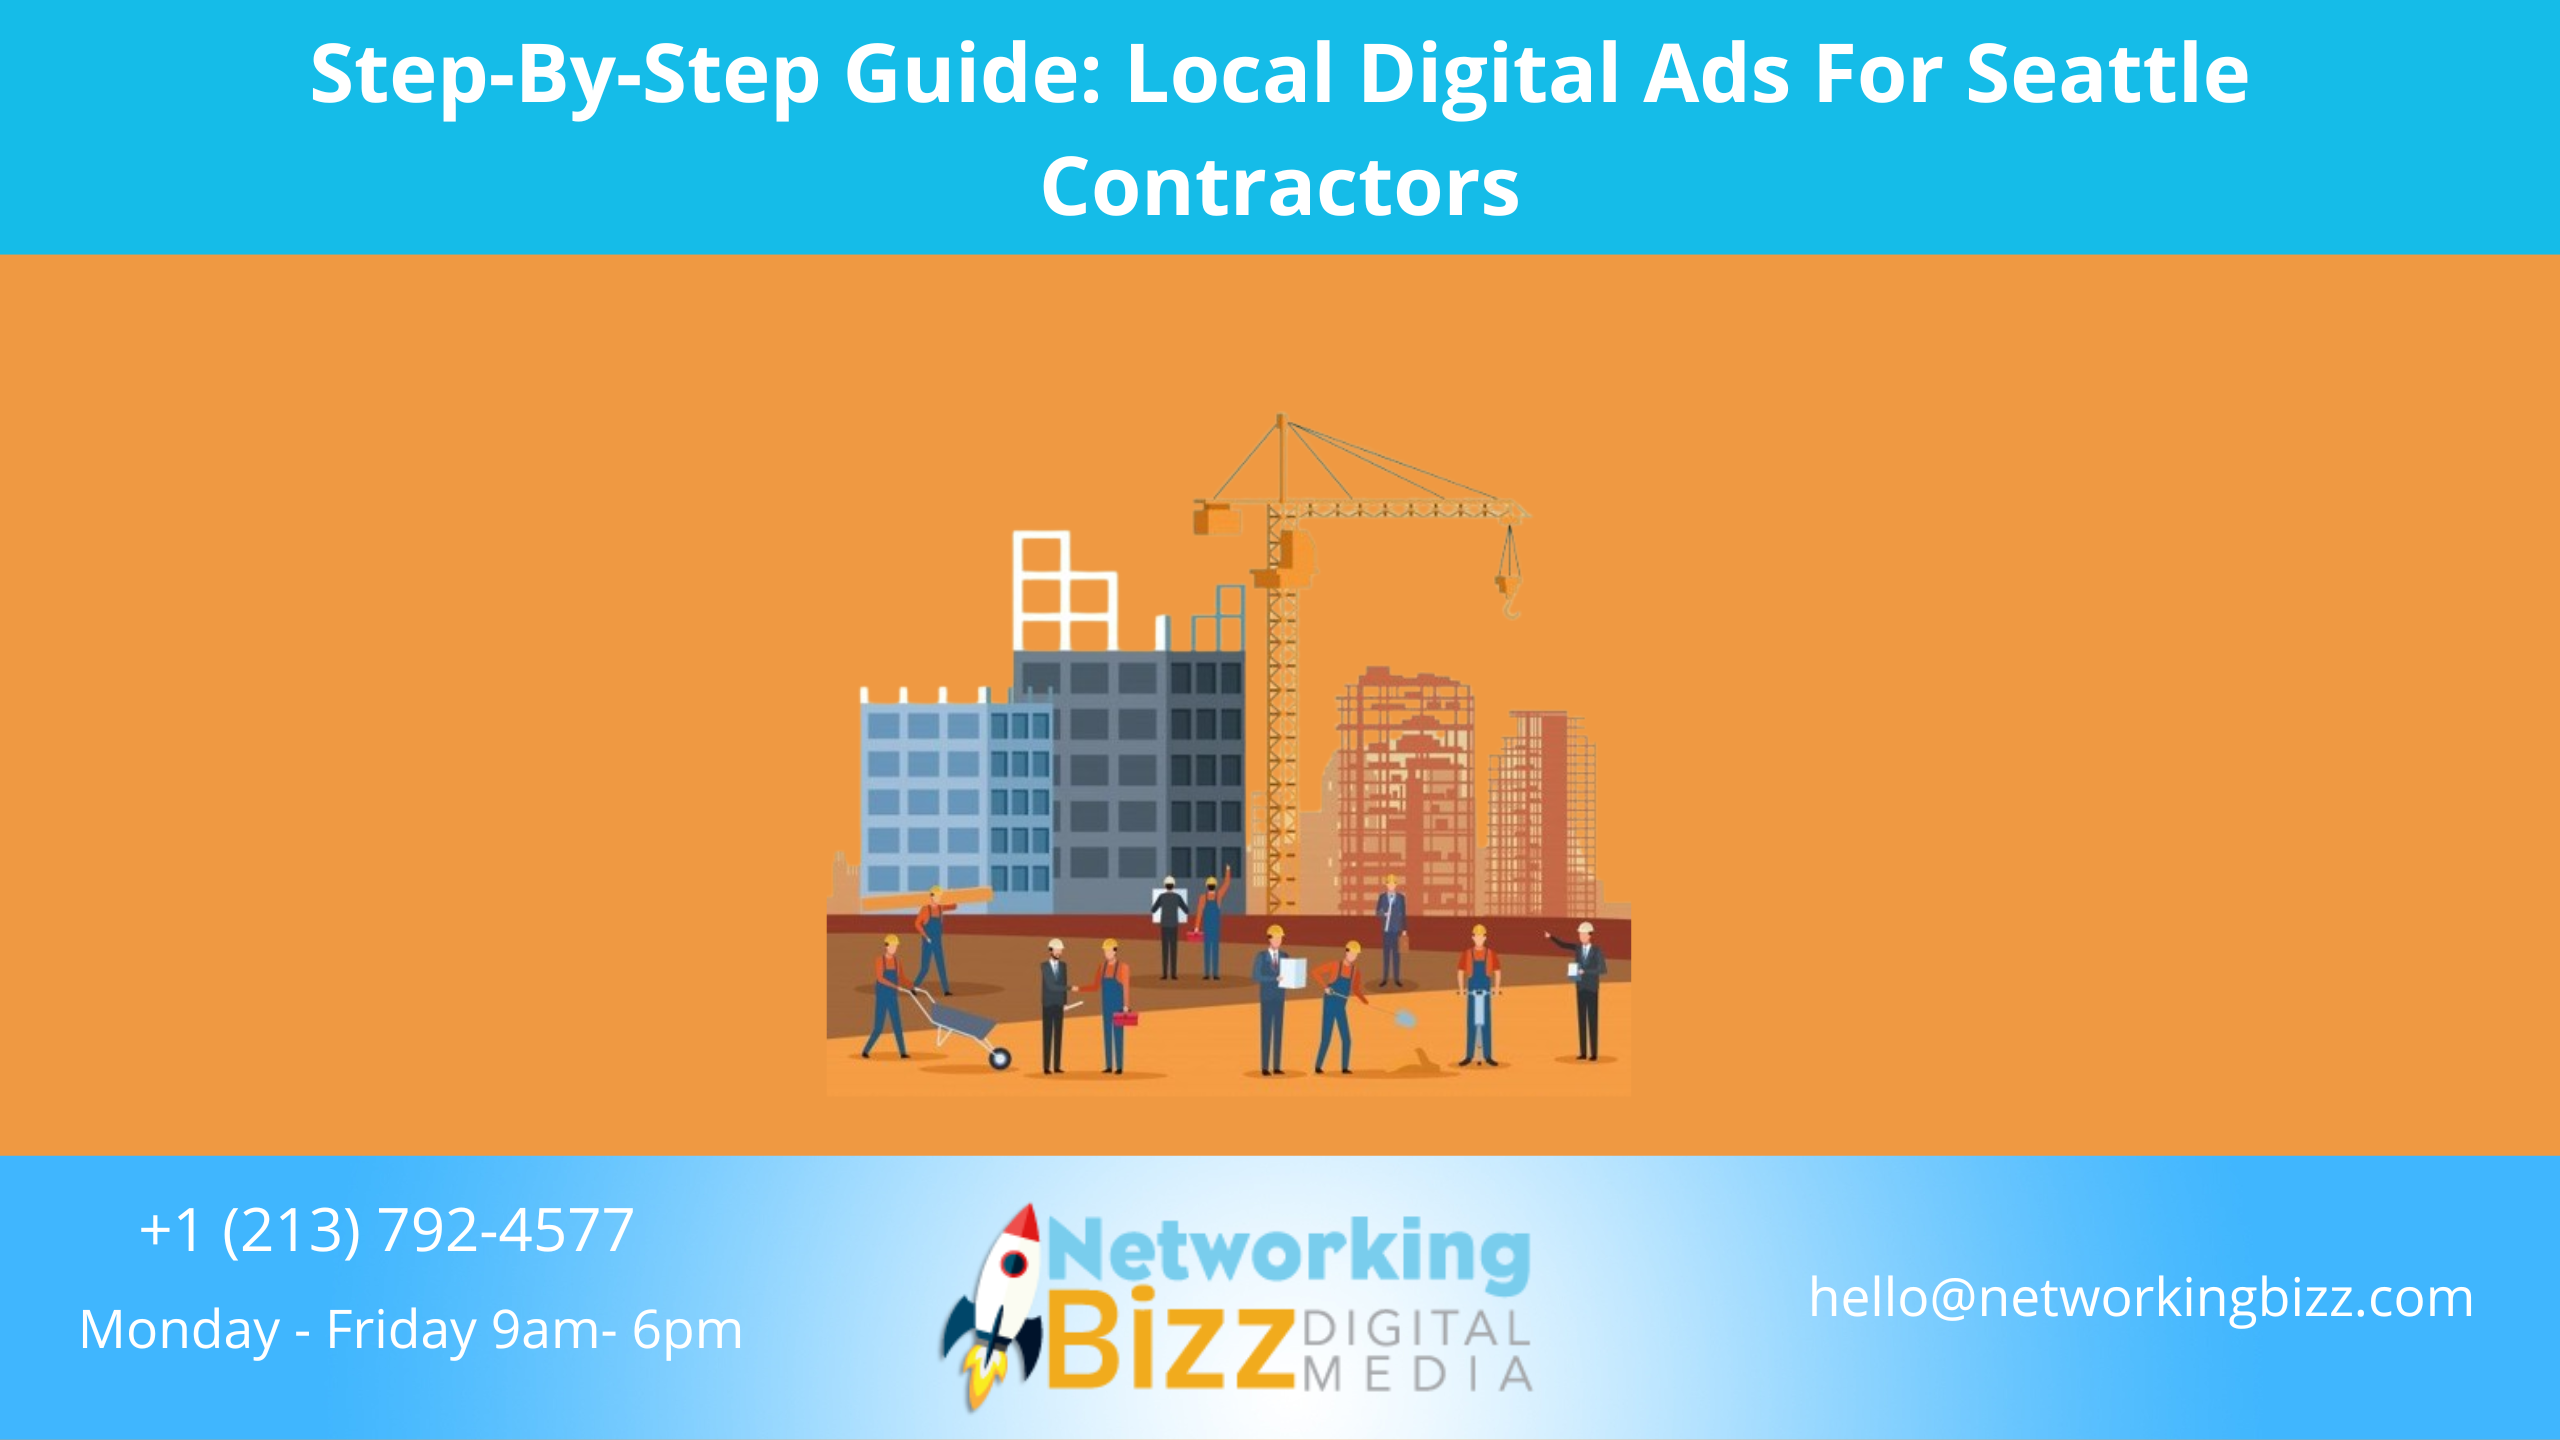 Step-By-Step Guide: Local Digital Ads For Seattle Contractors